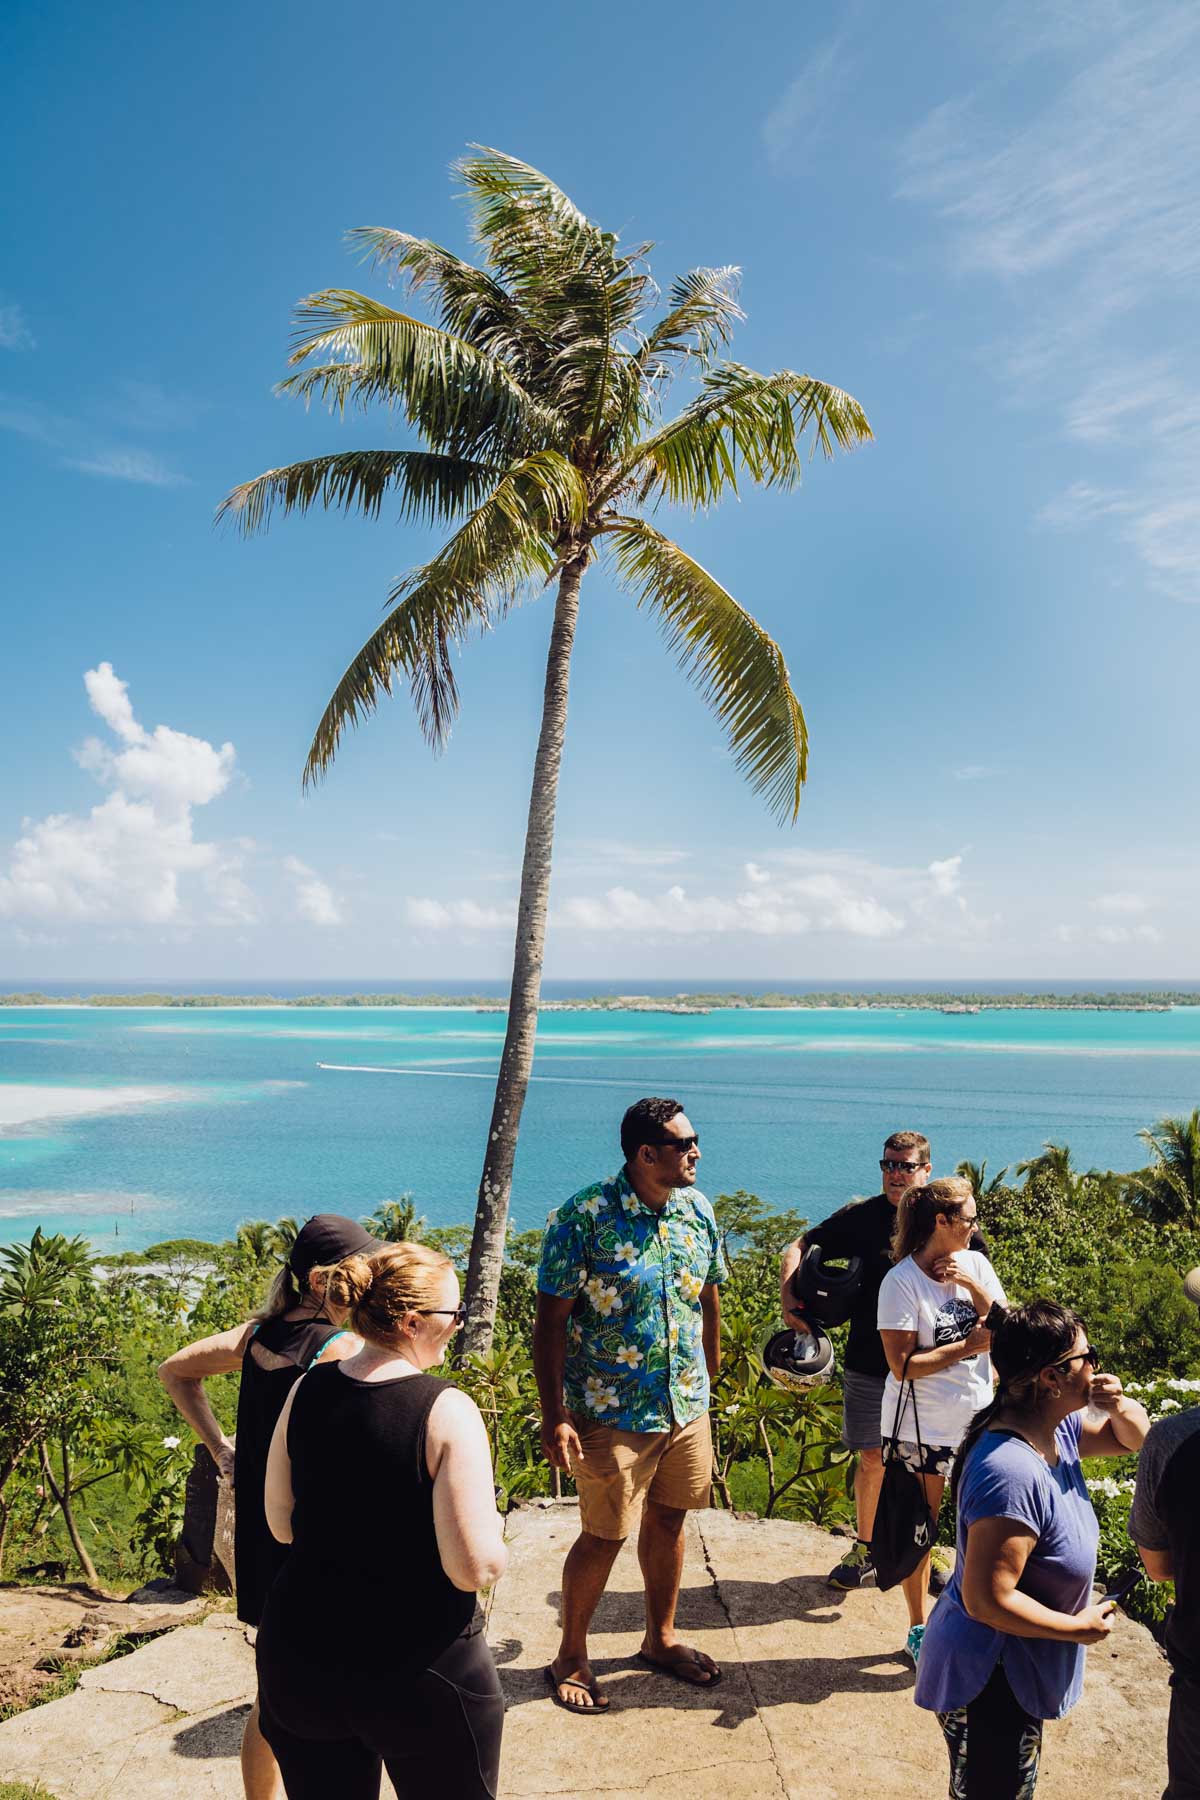 A tour guide on a viewpoint in Bora Bora